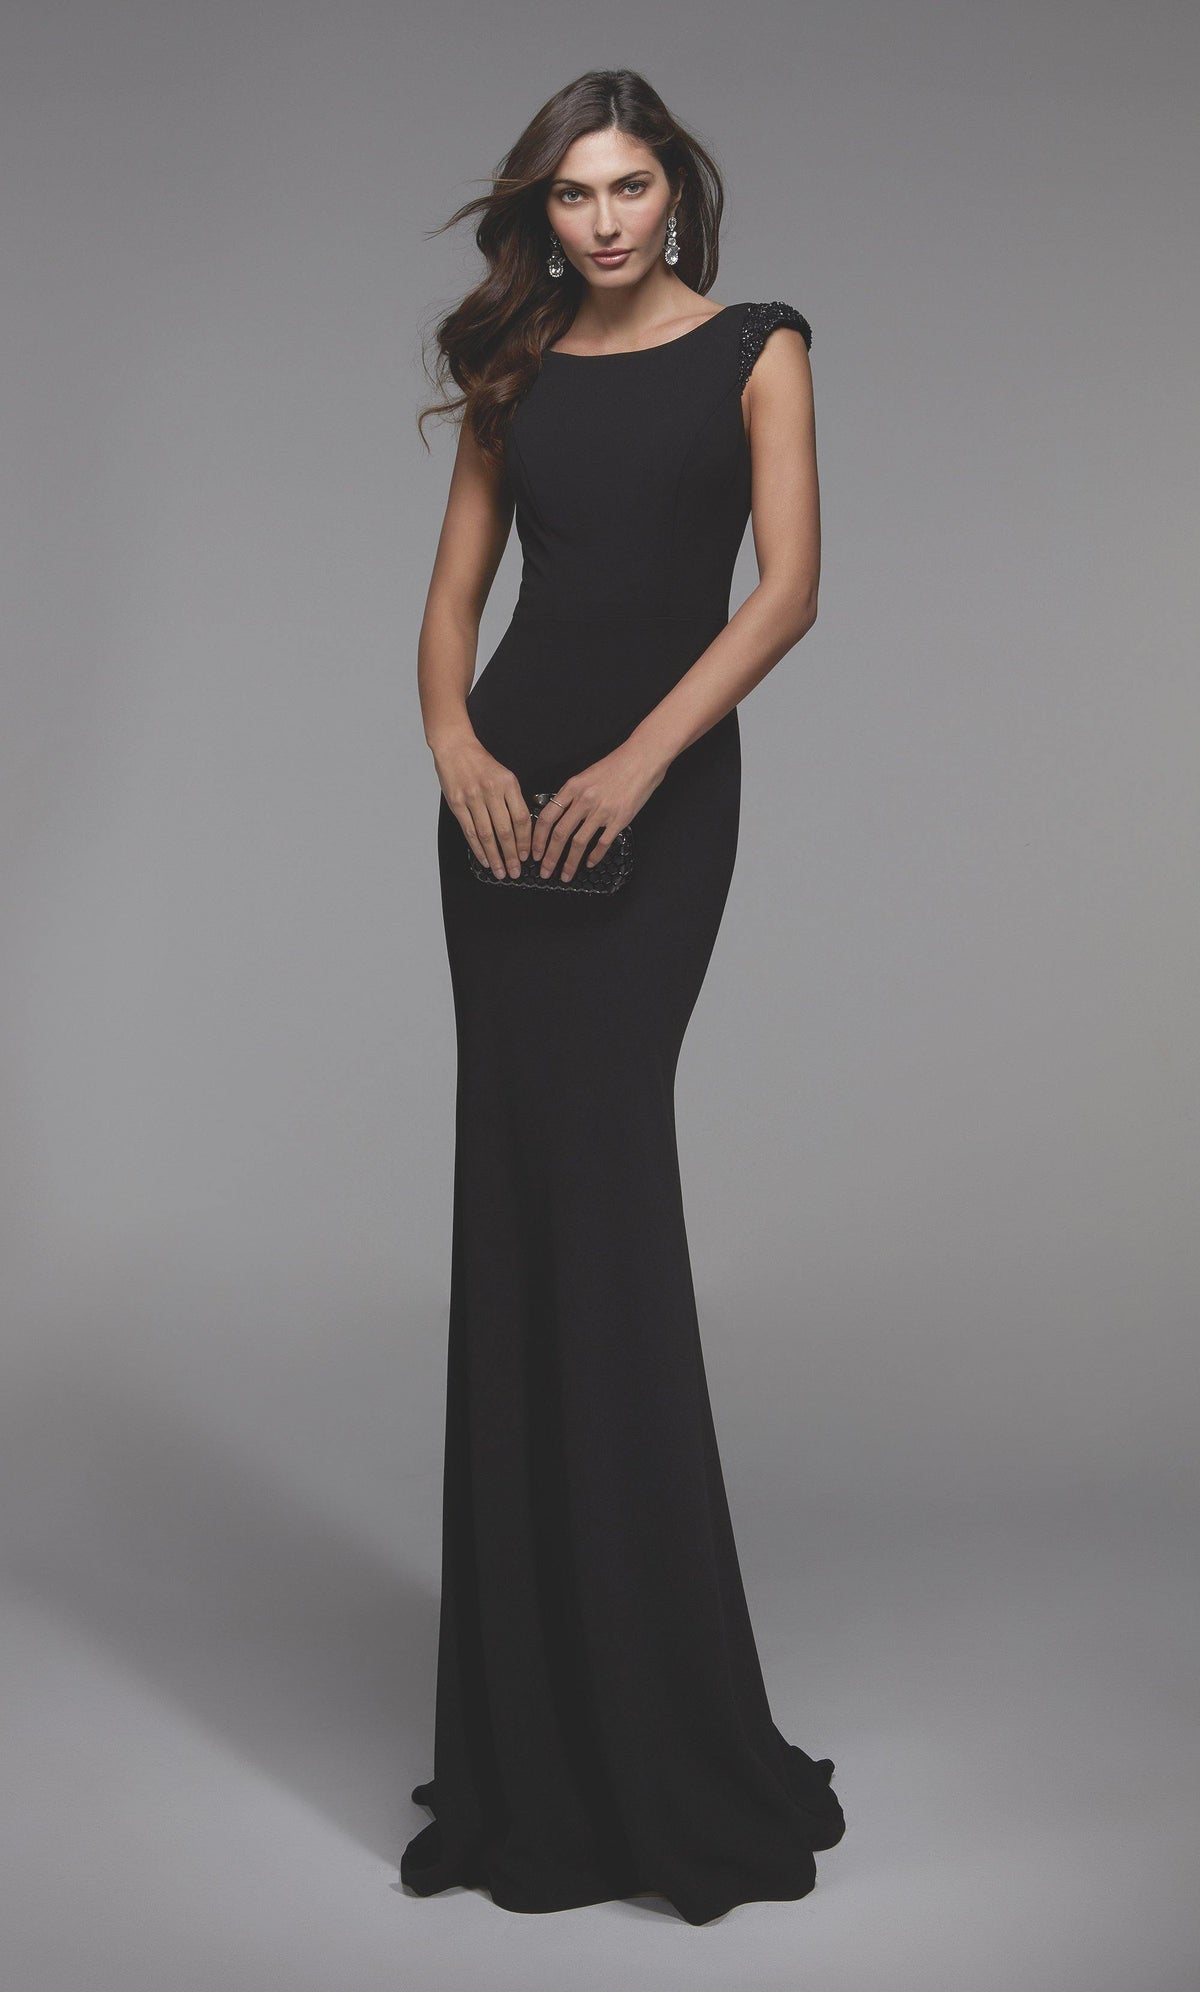 Black high scoop neck long evening dress with beaded capped sleeves